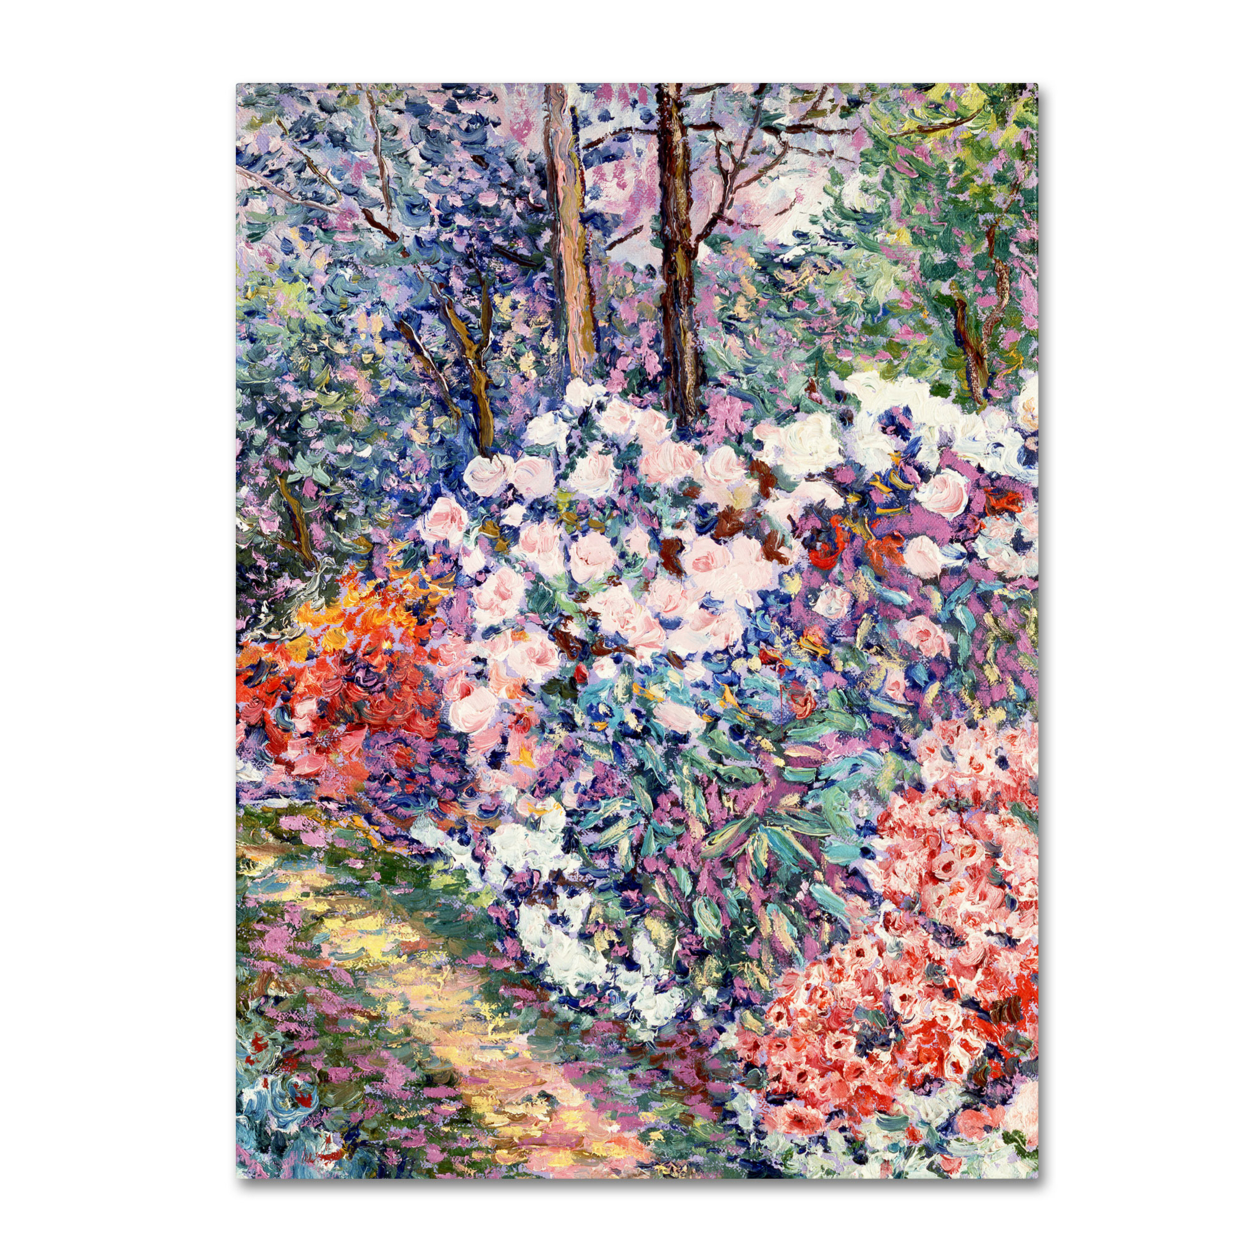 Manor Shadian 'Flowers In The Forest' Canvas Wall Art 35 X 47 Inches